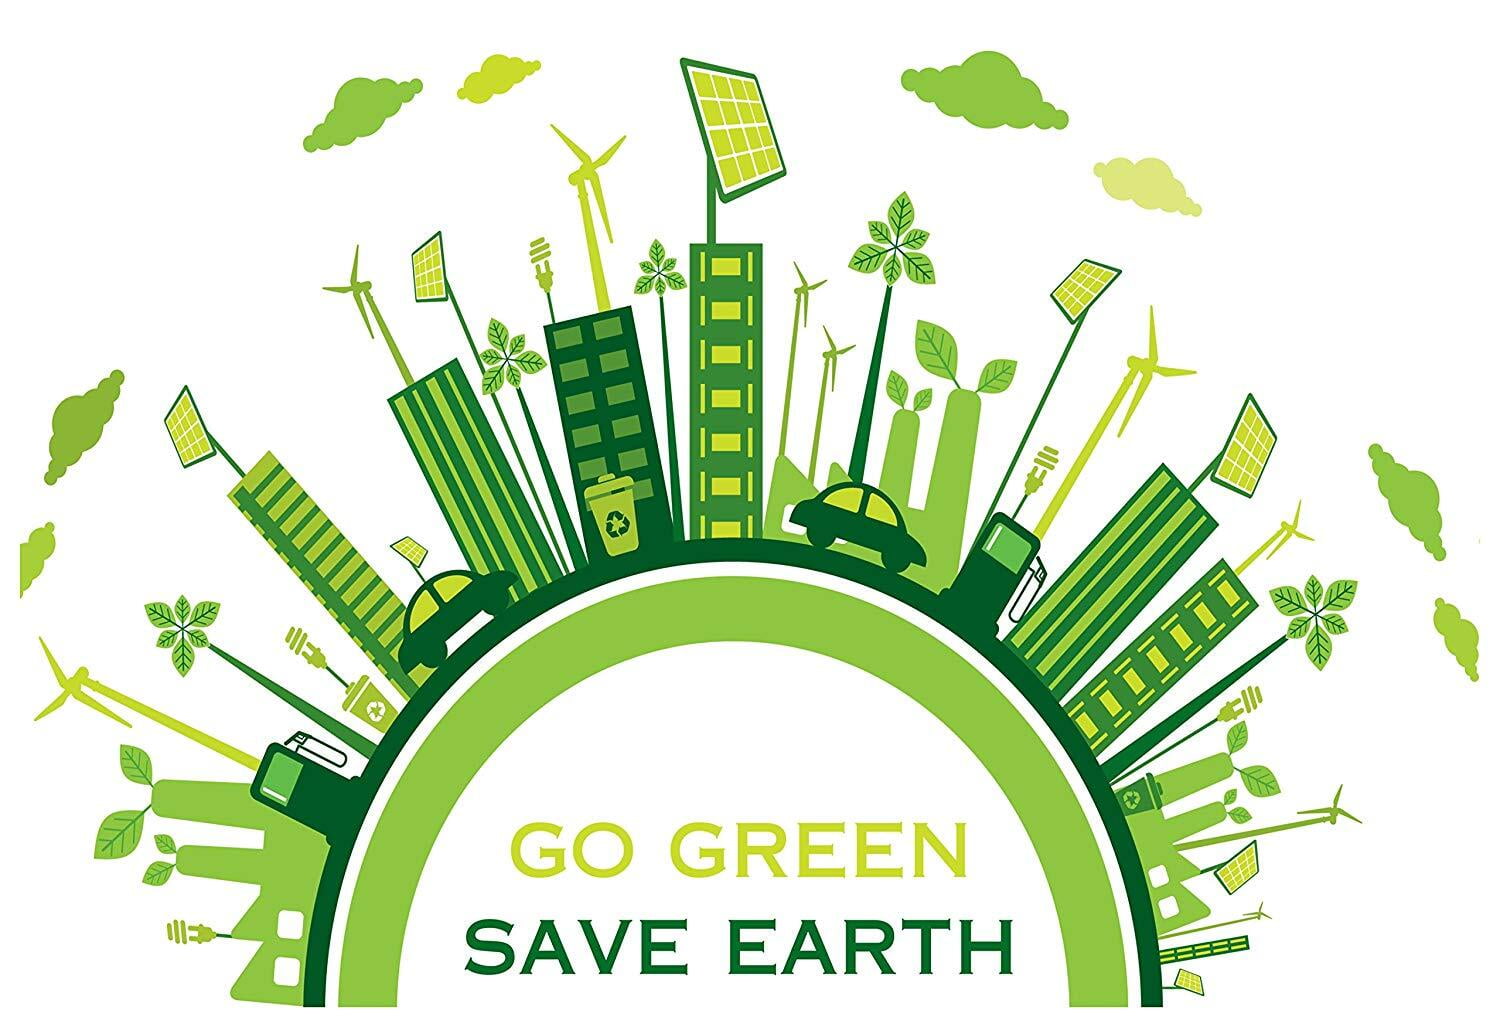 Go Green Save Earth Campaign at ITS Engineering College Delhi NCR